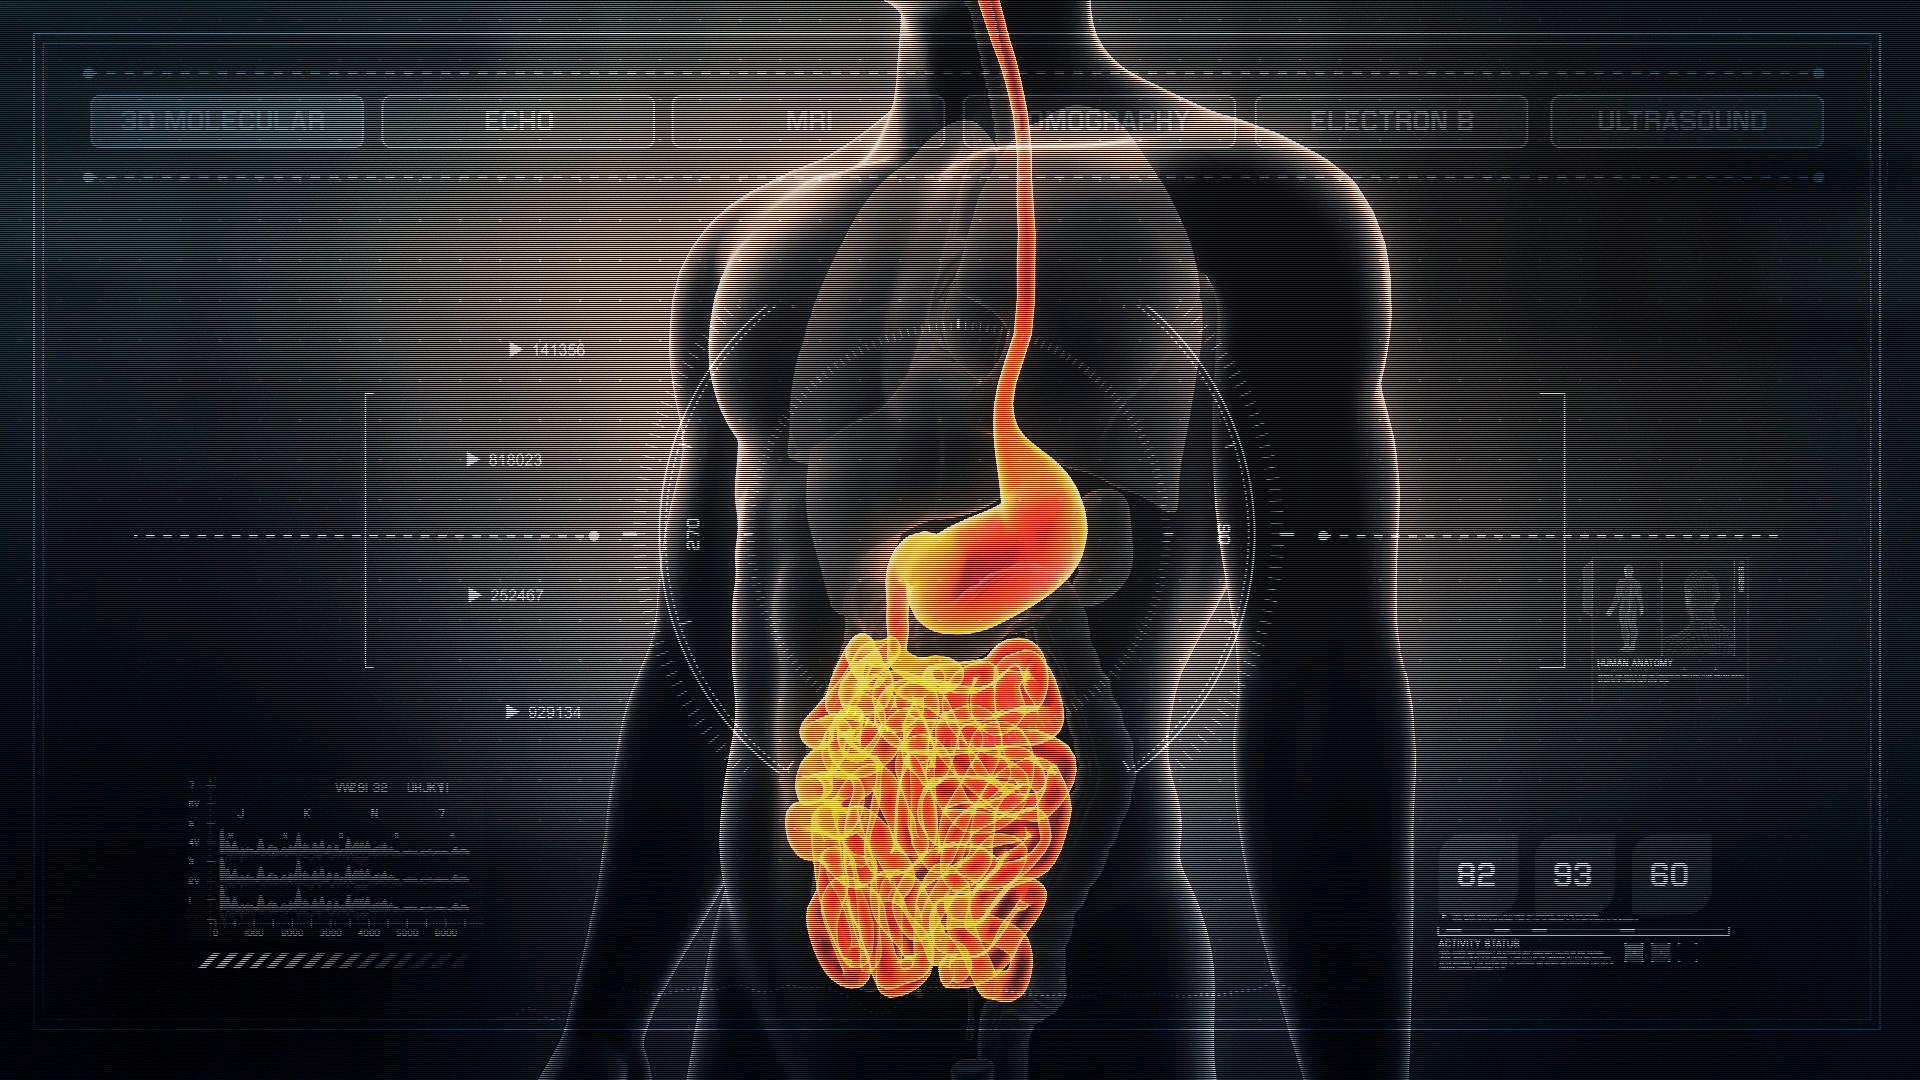 Futuristic Interface Display of Human Male Digestive System Gut and